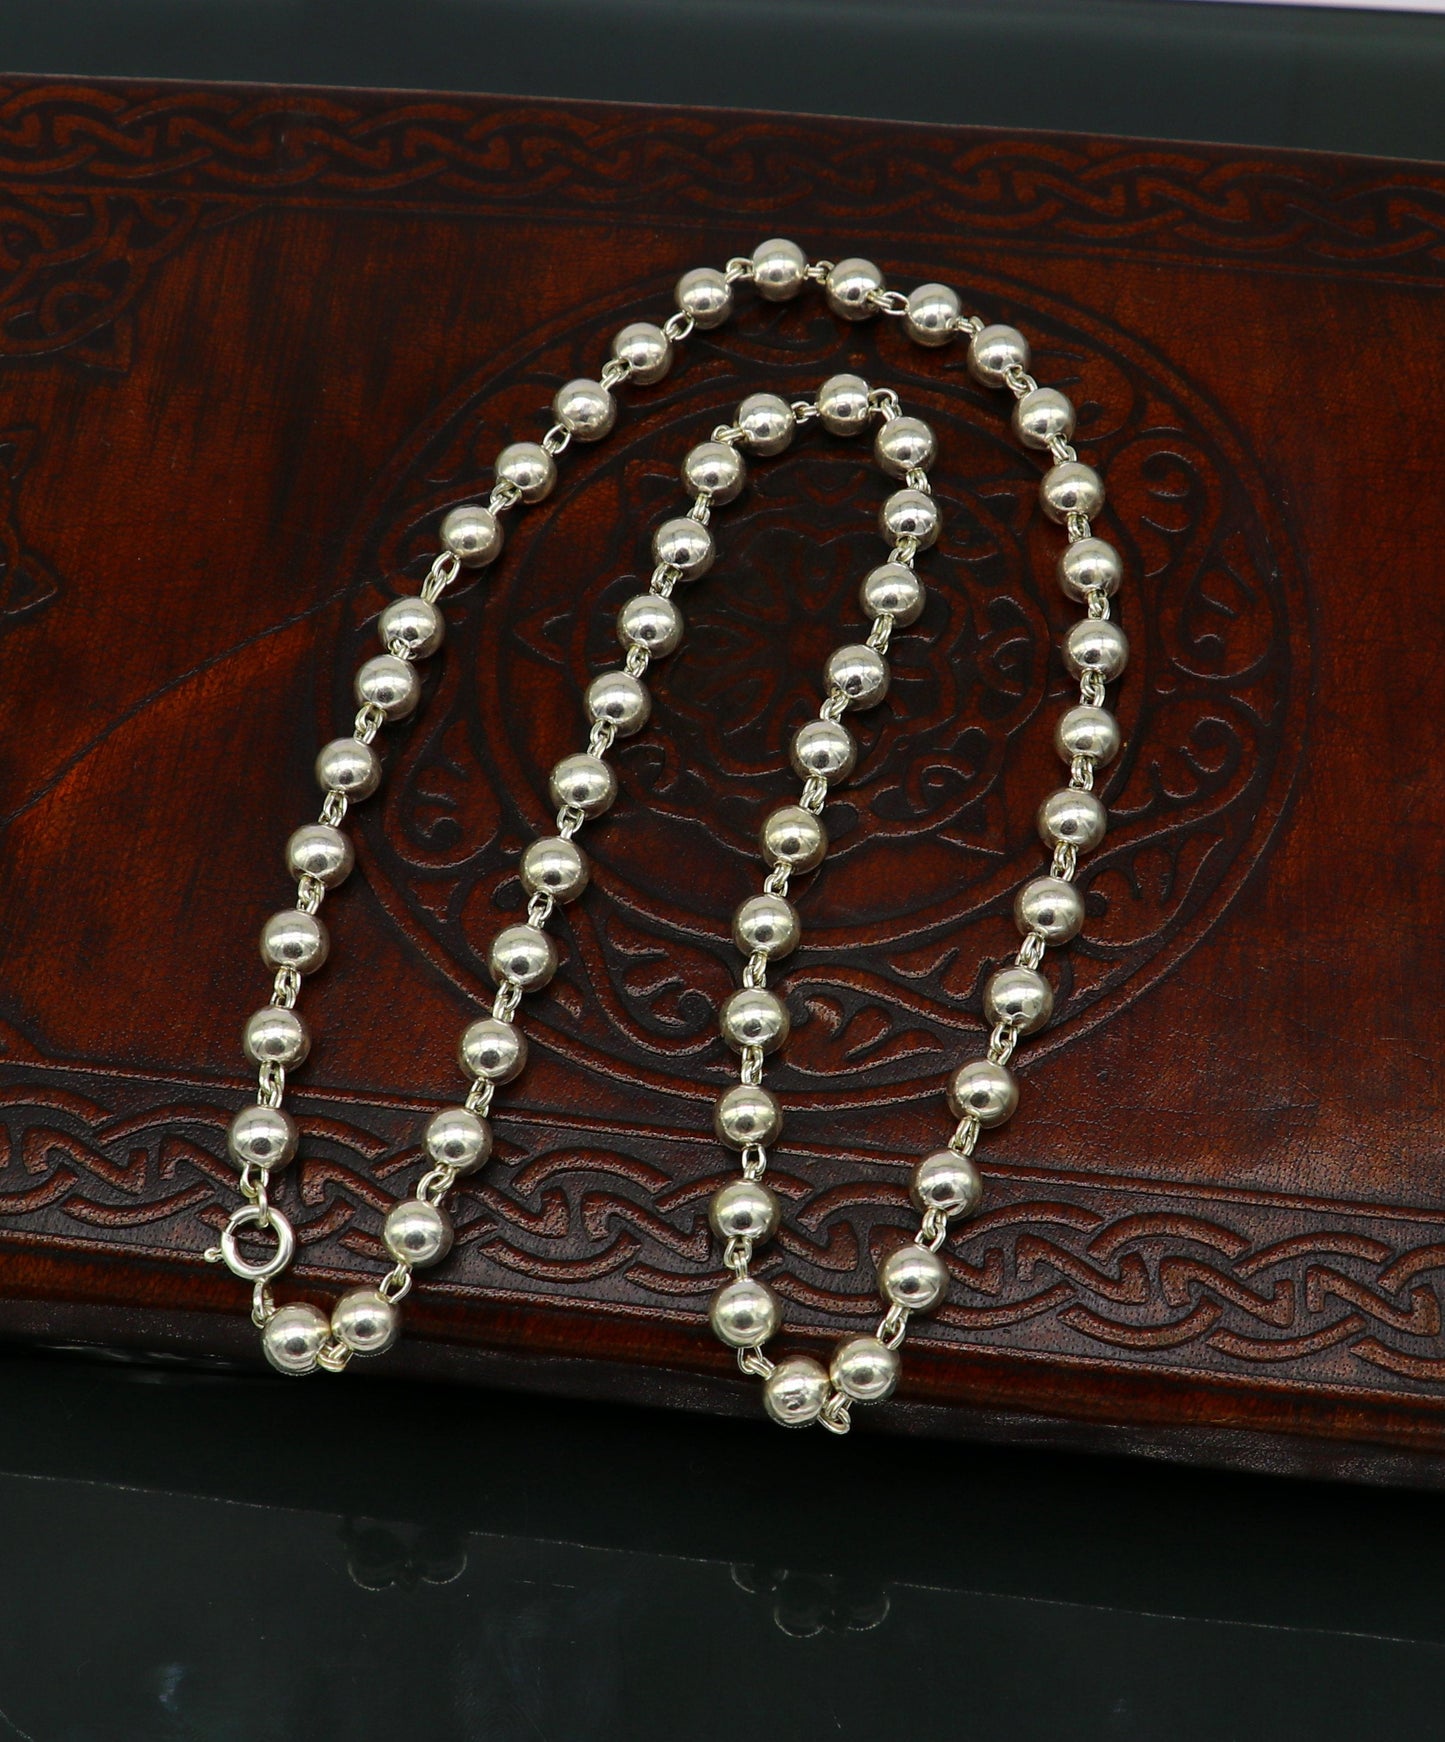 925 sterling silver handmade beaded chain necklace, exclusivr 19.5 inches long unisex best gifting necklace daily use jewelry nch12 - TRIBAL ORNAMENTS